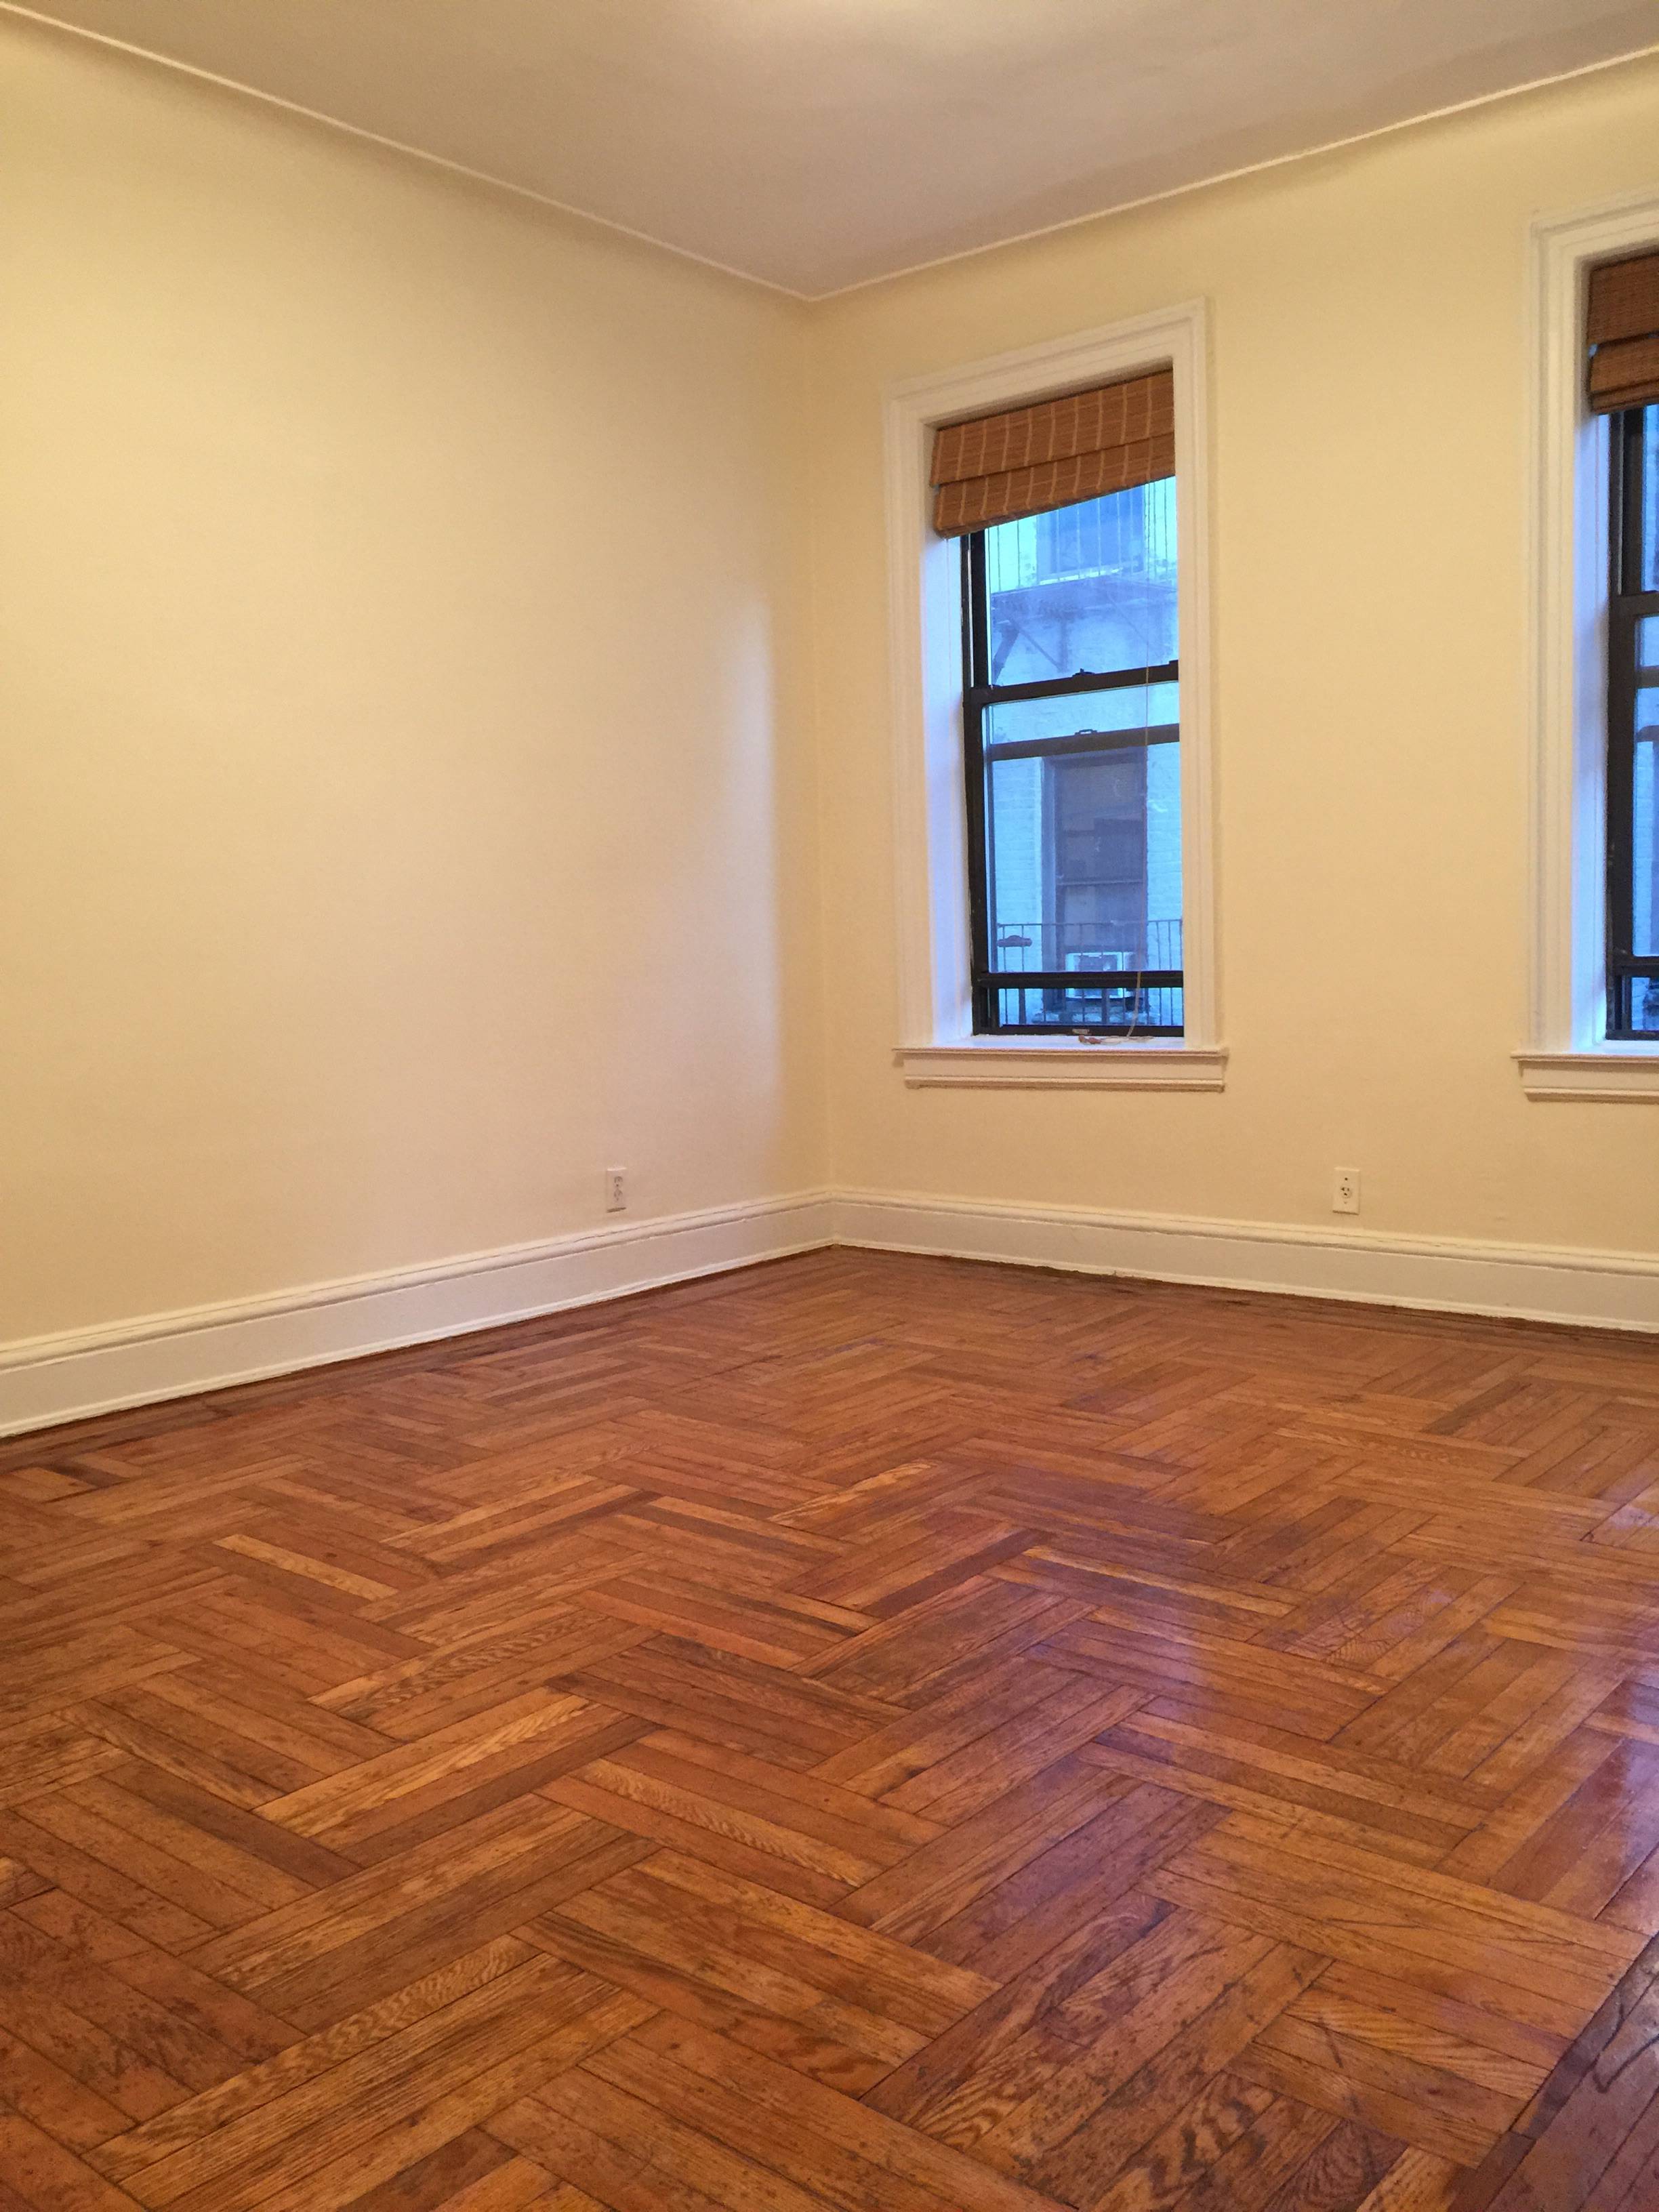 Very large 1Br Astoria $1,750.00/month Broadway Vicinity N/Q Subway Station 